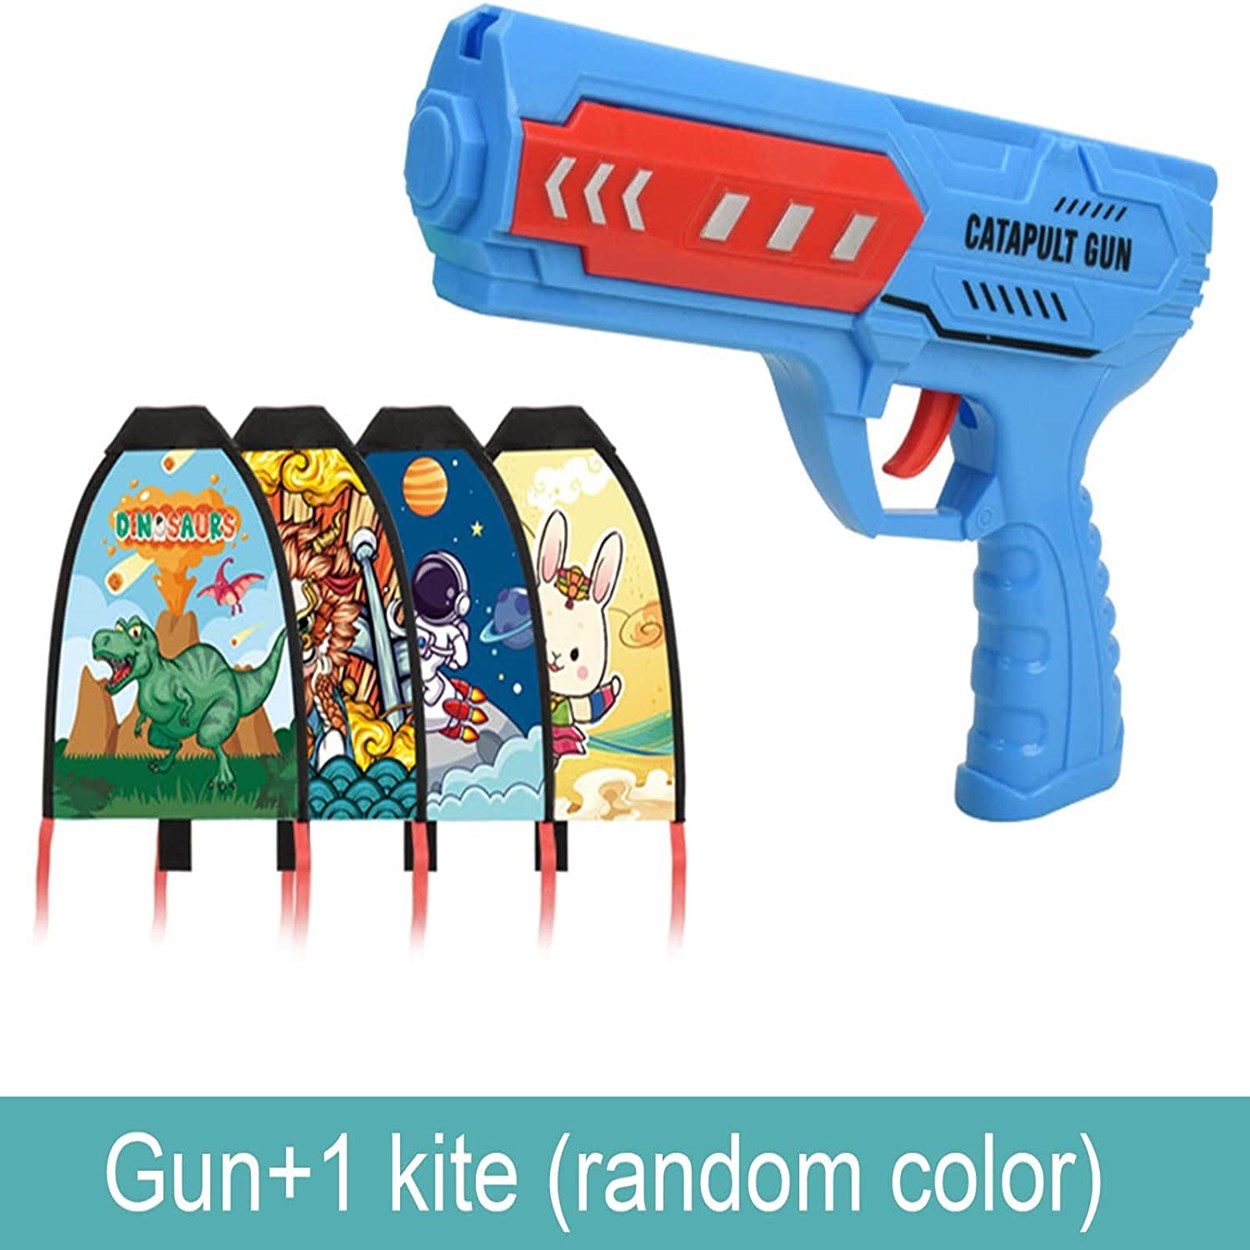 Kite Launcher Toys, Kite Toy Set with Launcher Ejection Kite Beach